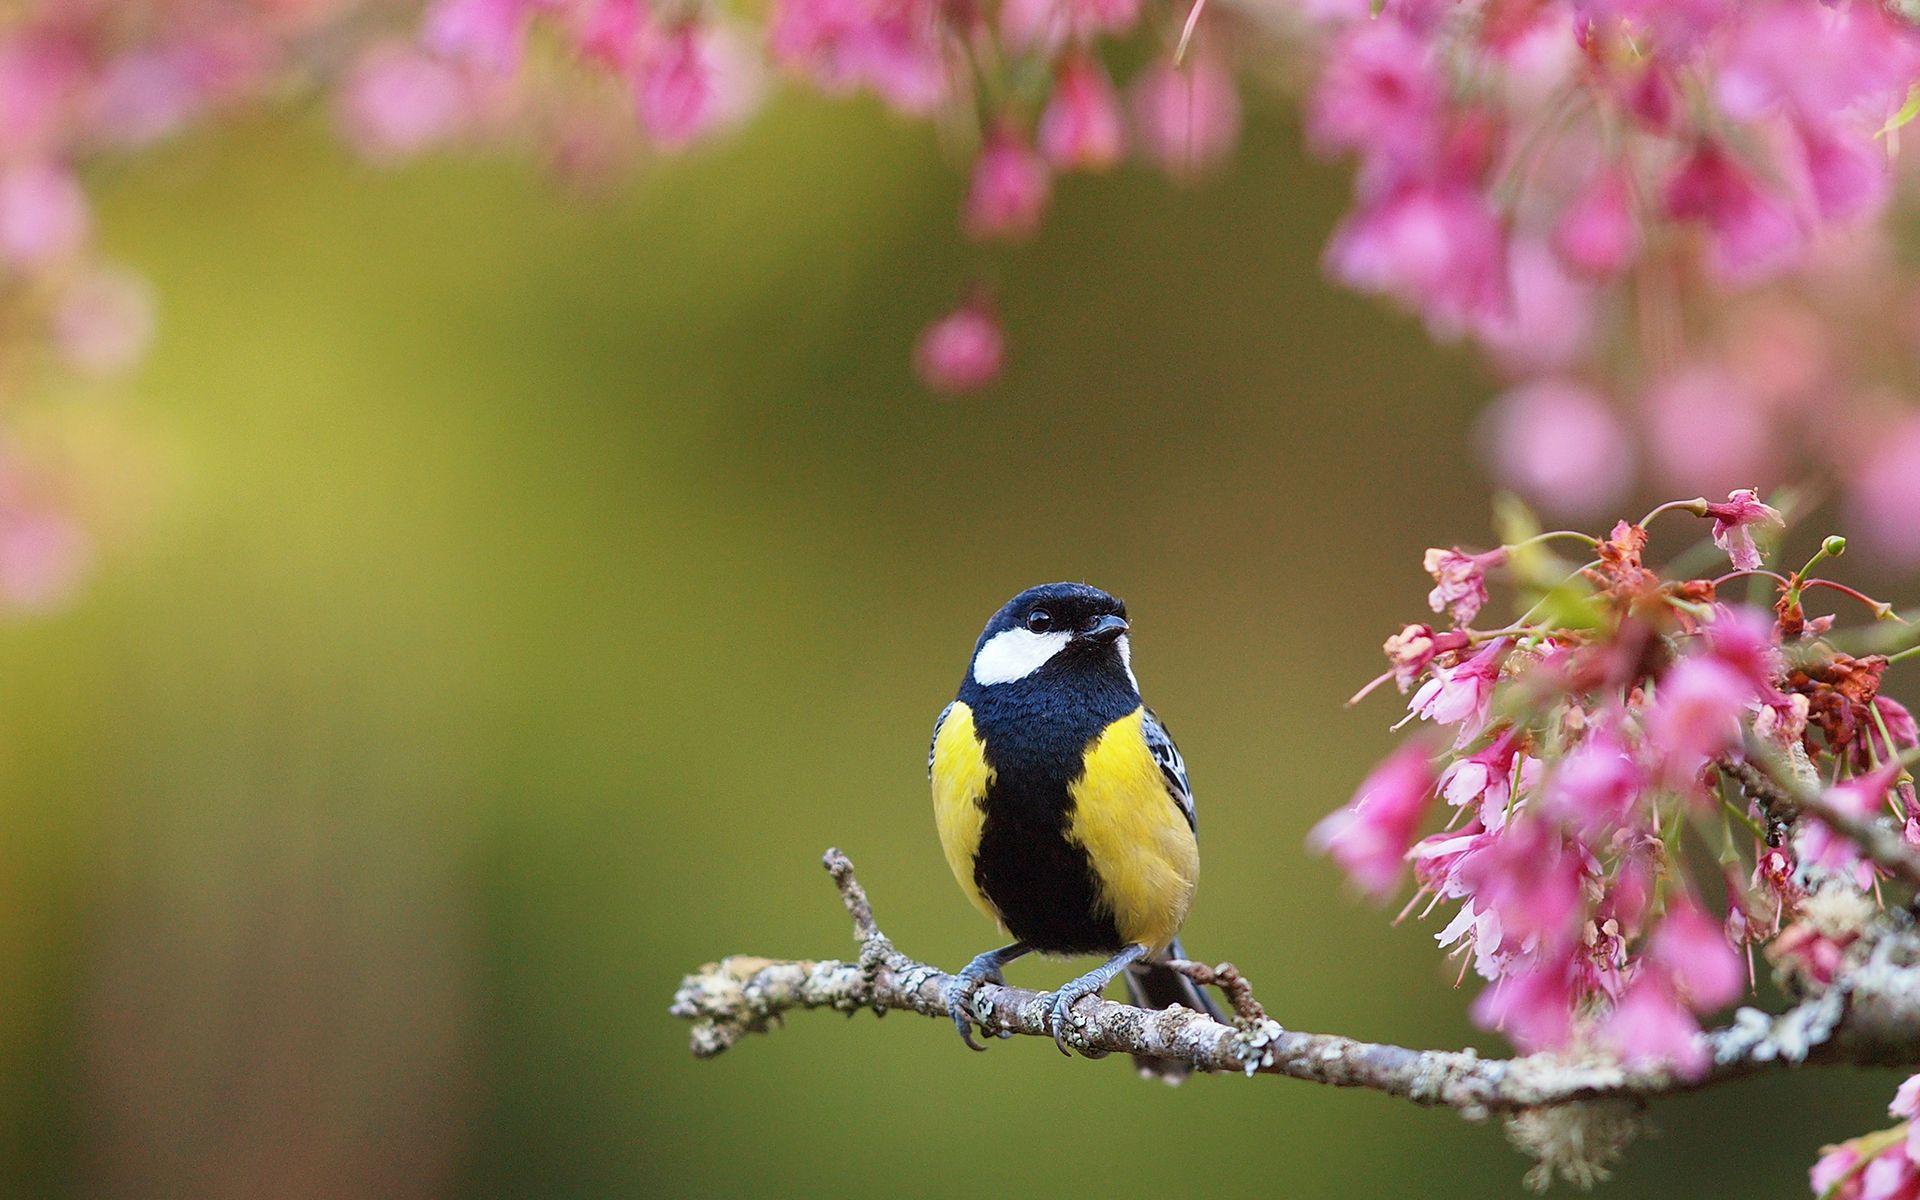 Birds and Flowers Desktop Wallpapers - Top Free Birds and Flowers